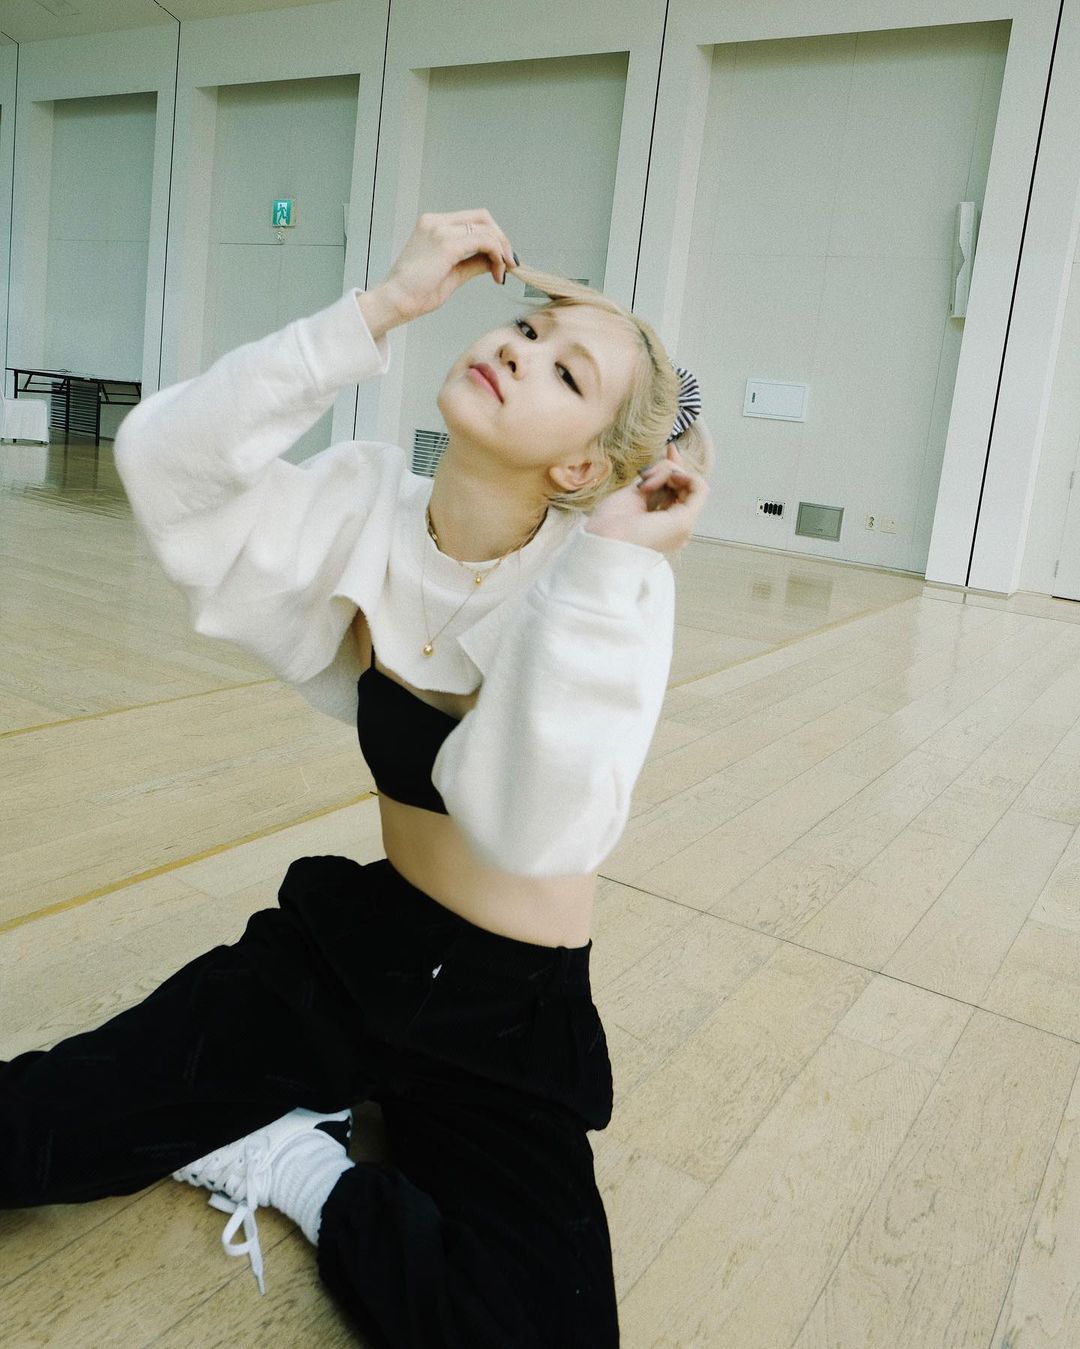 ROSÉ, 'On The Ground' dance performance video released